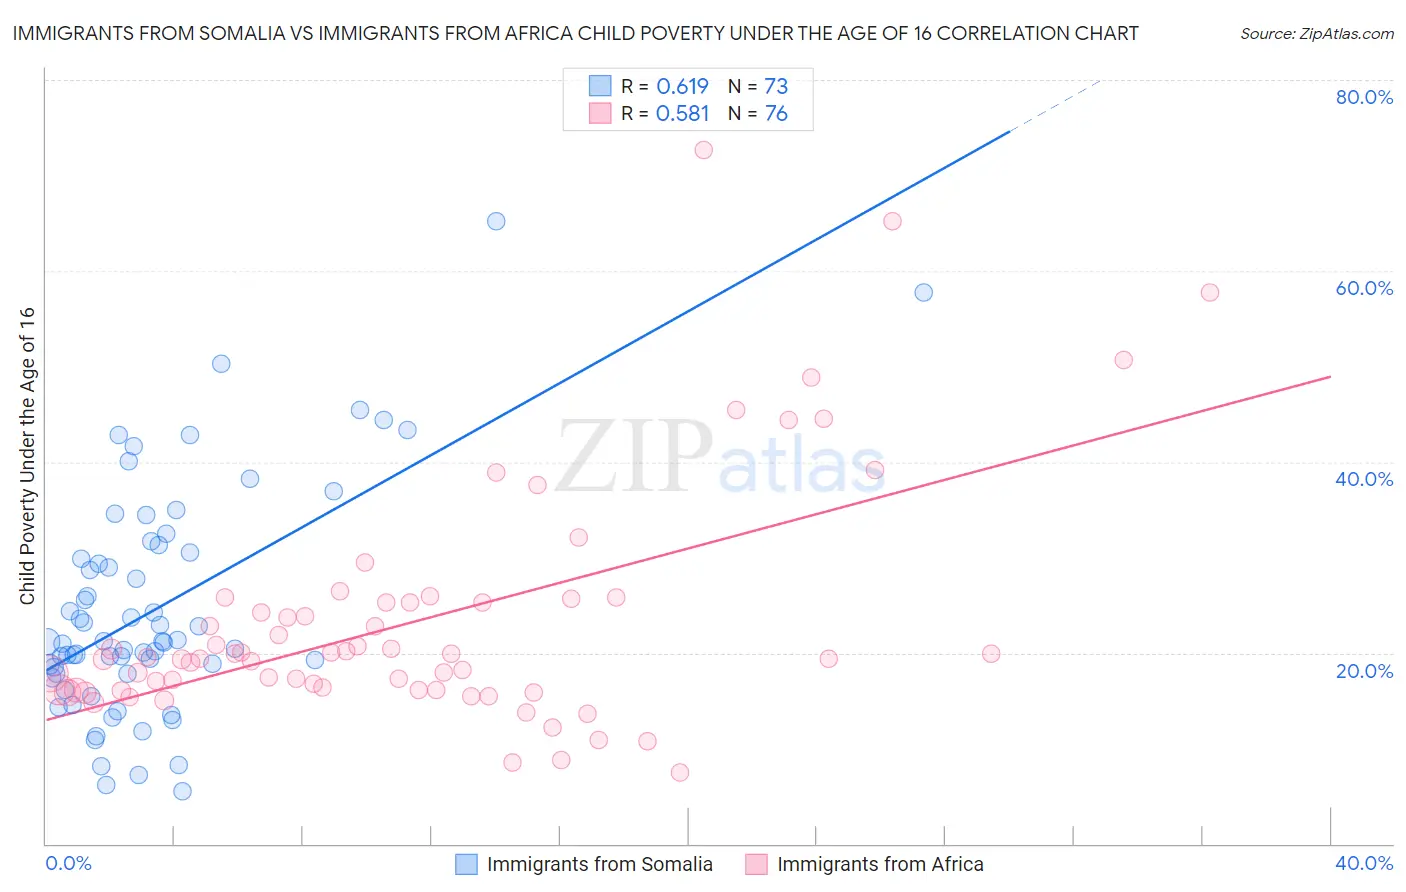 Immigrants from Somalia vs Immigrants from Africa Child Poverty Under the Age of 16